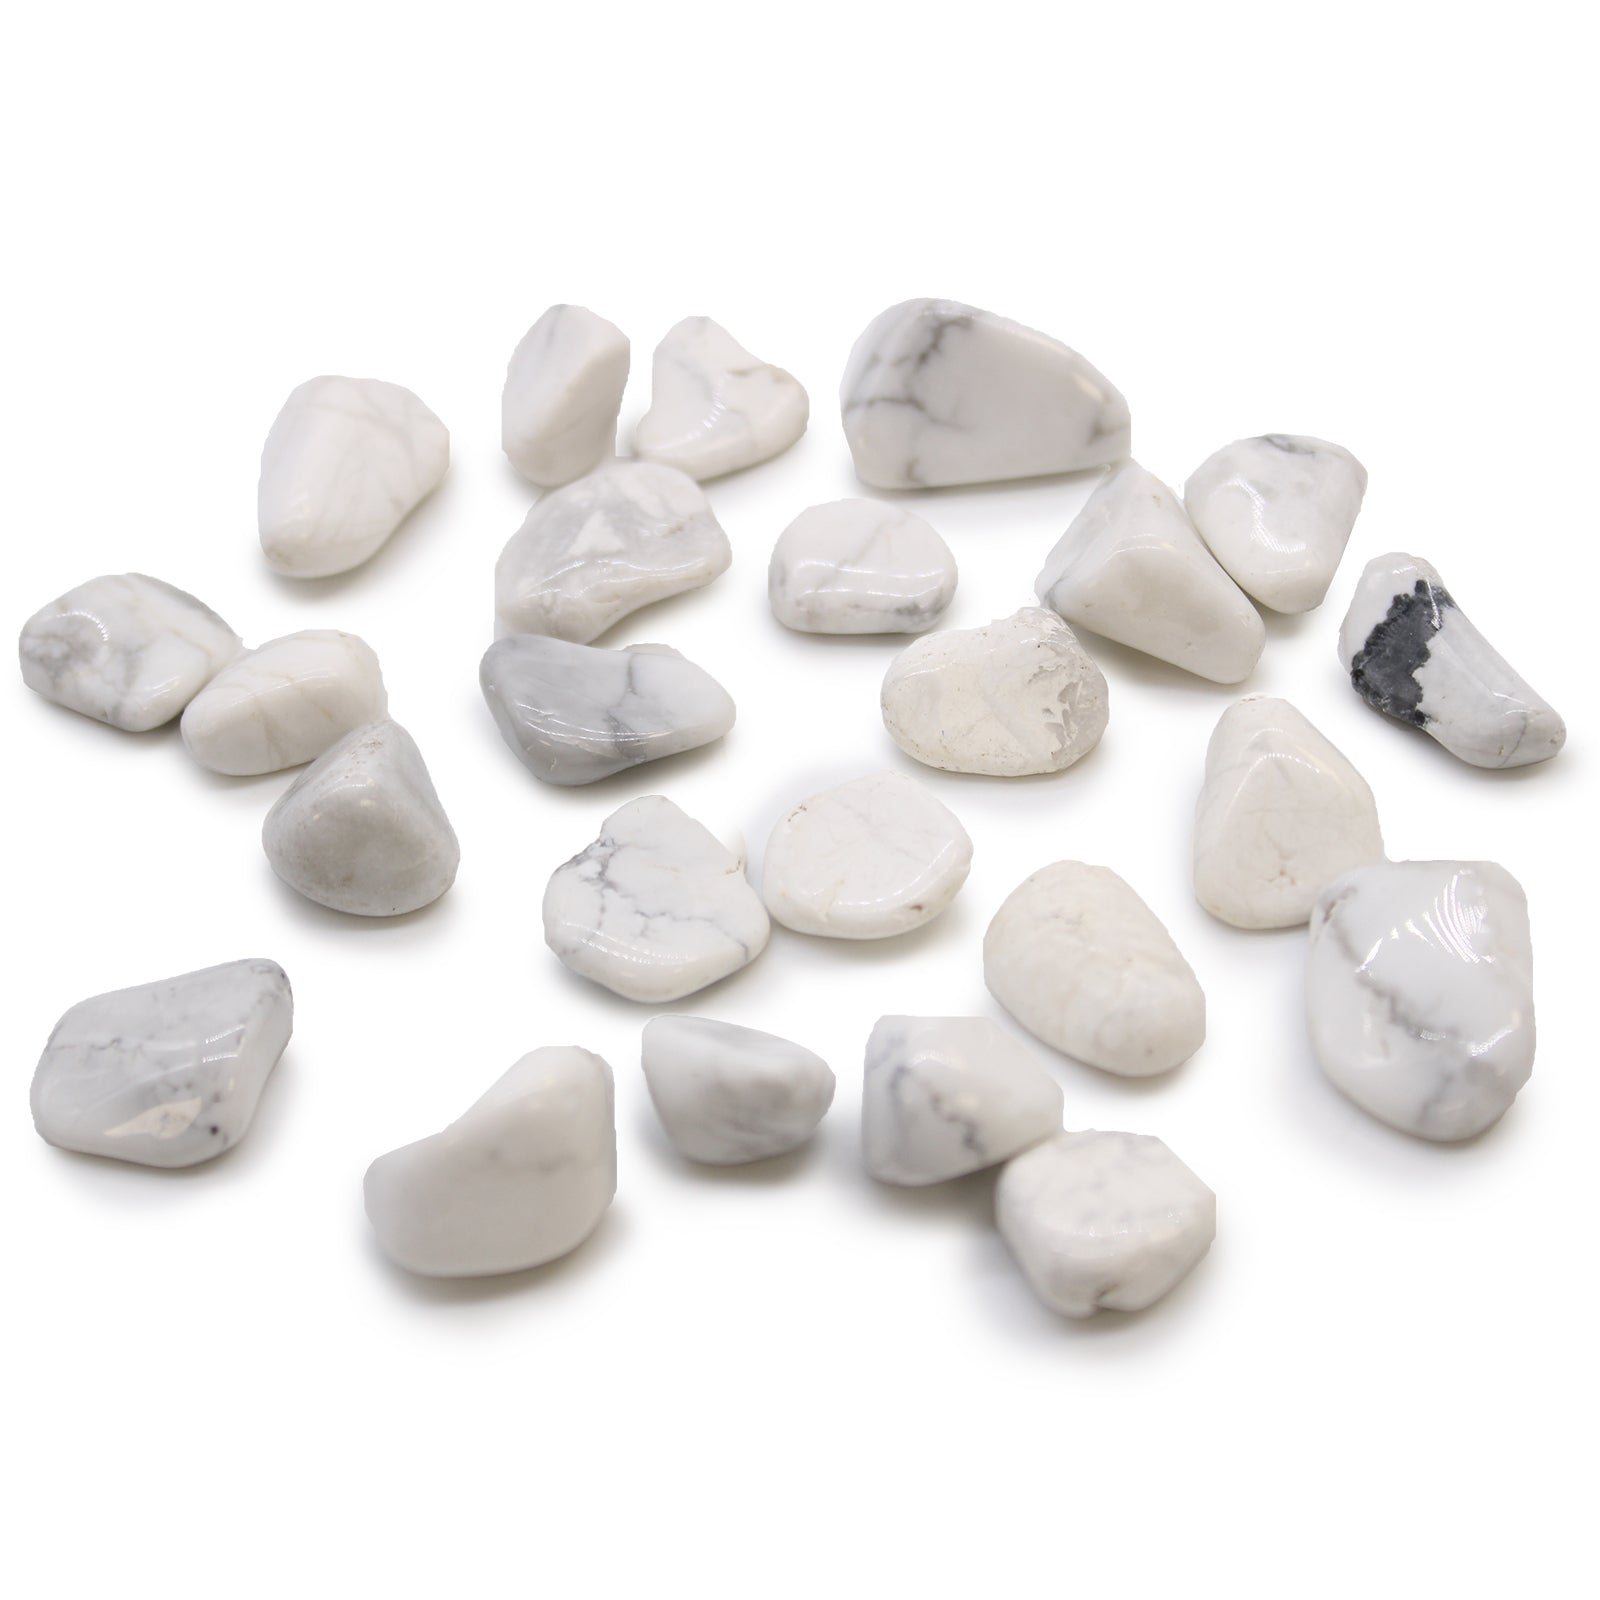 View Small African Tumble Stones White Howlite Magnesite information